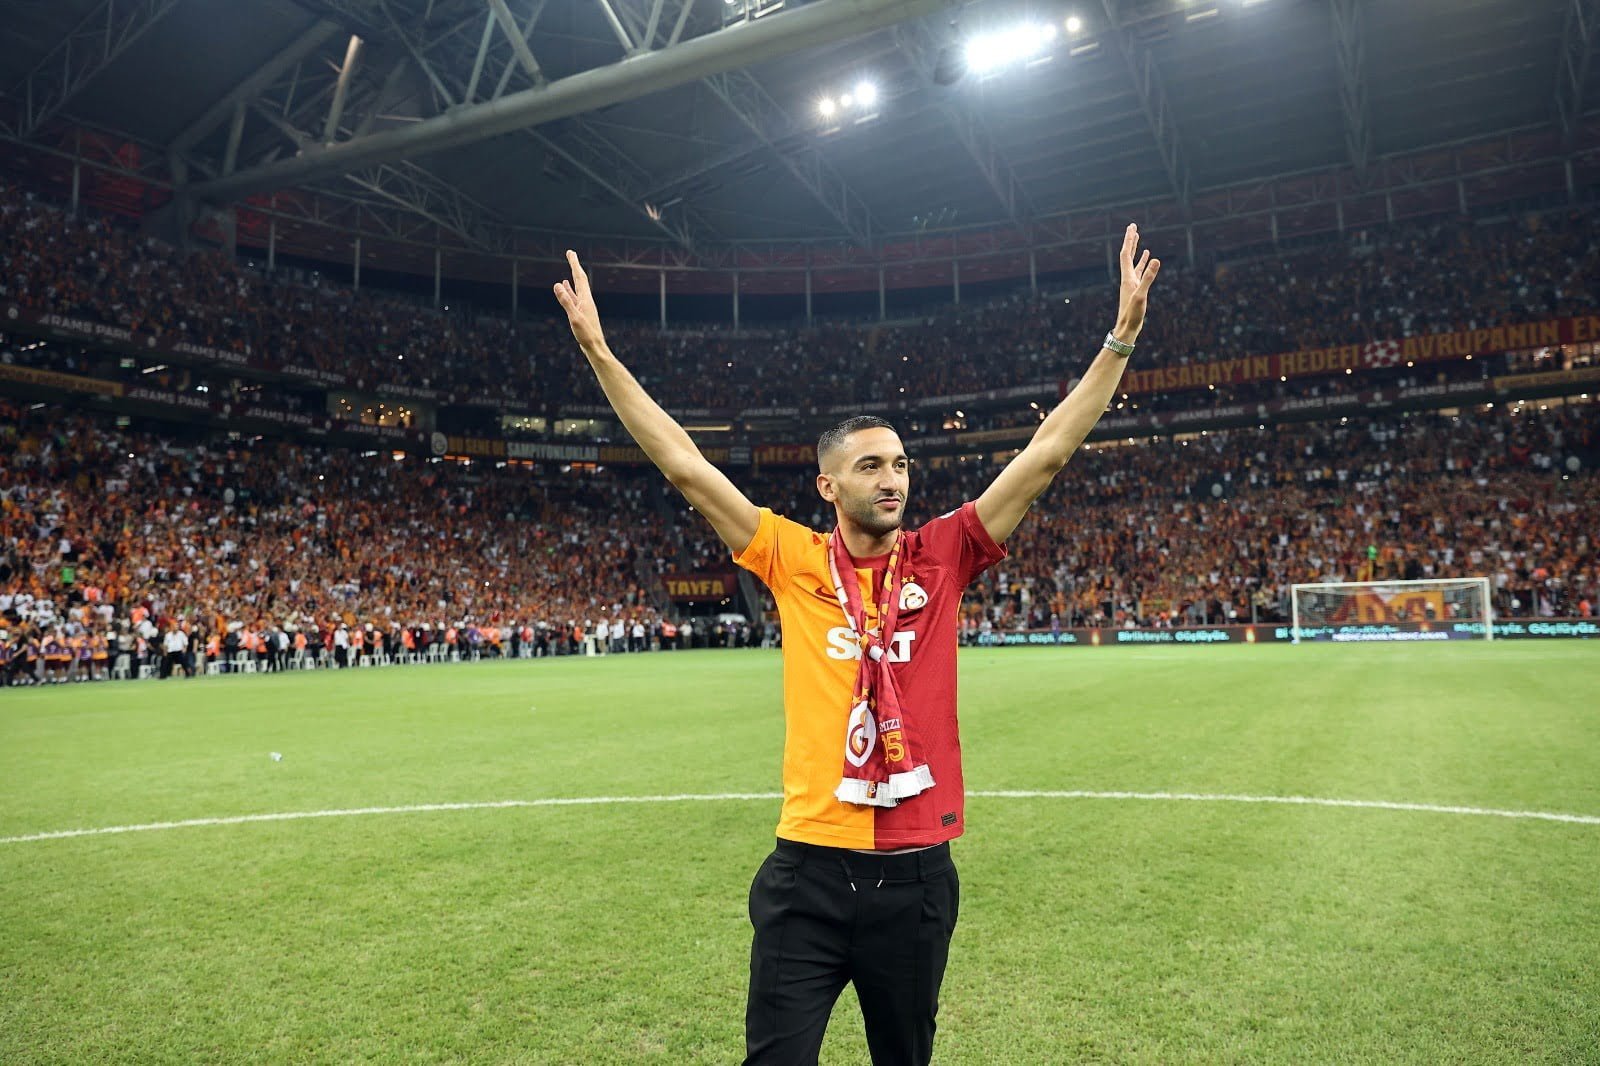 Hakim Ziyech Leaves Galatasaray: To Which Destination? - Media7